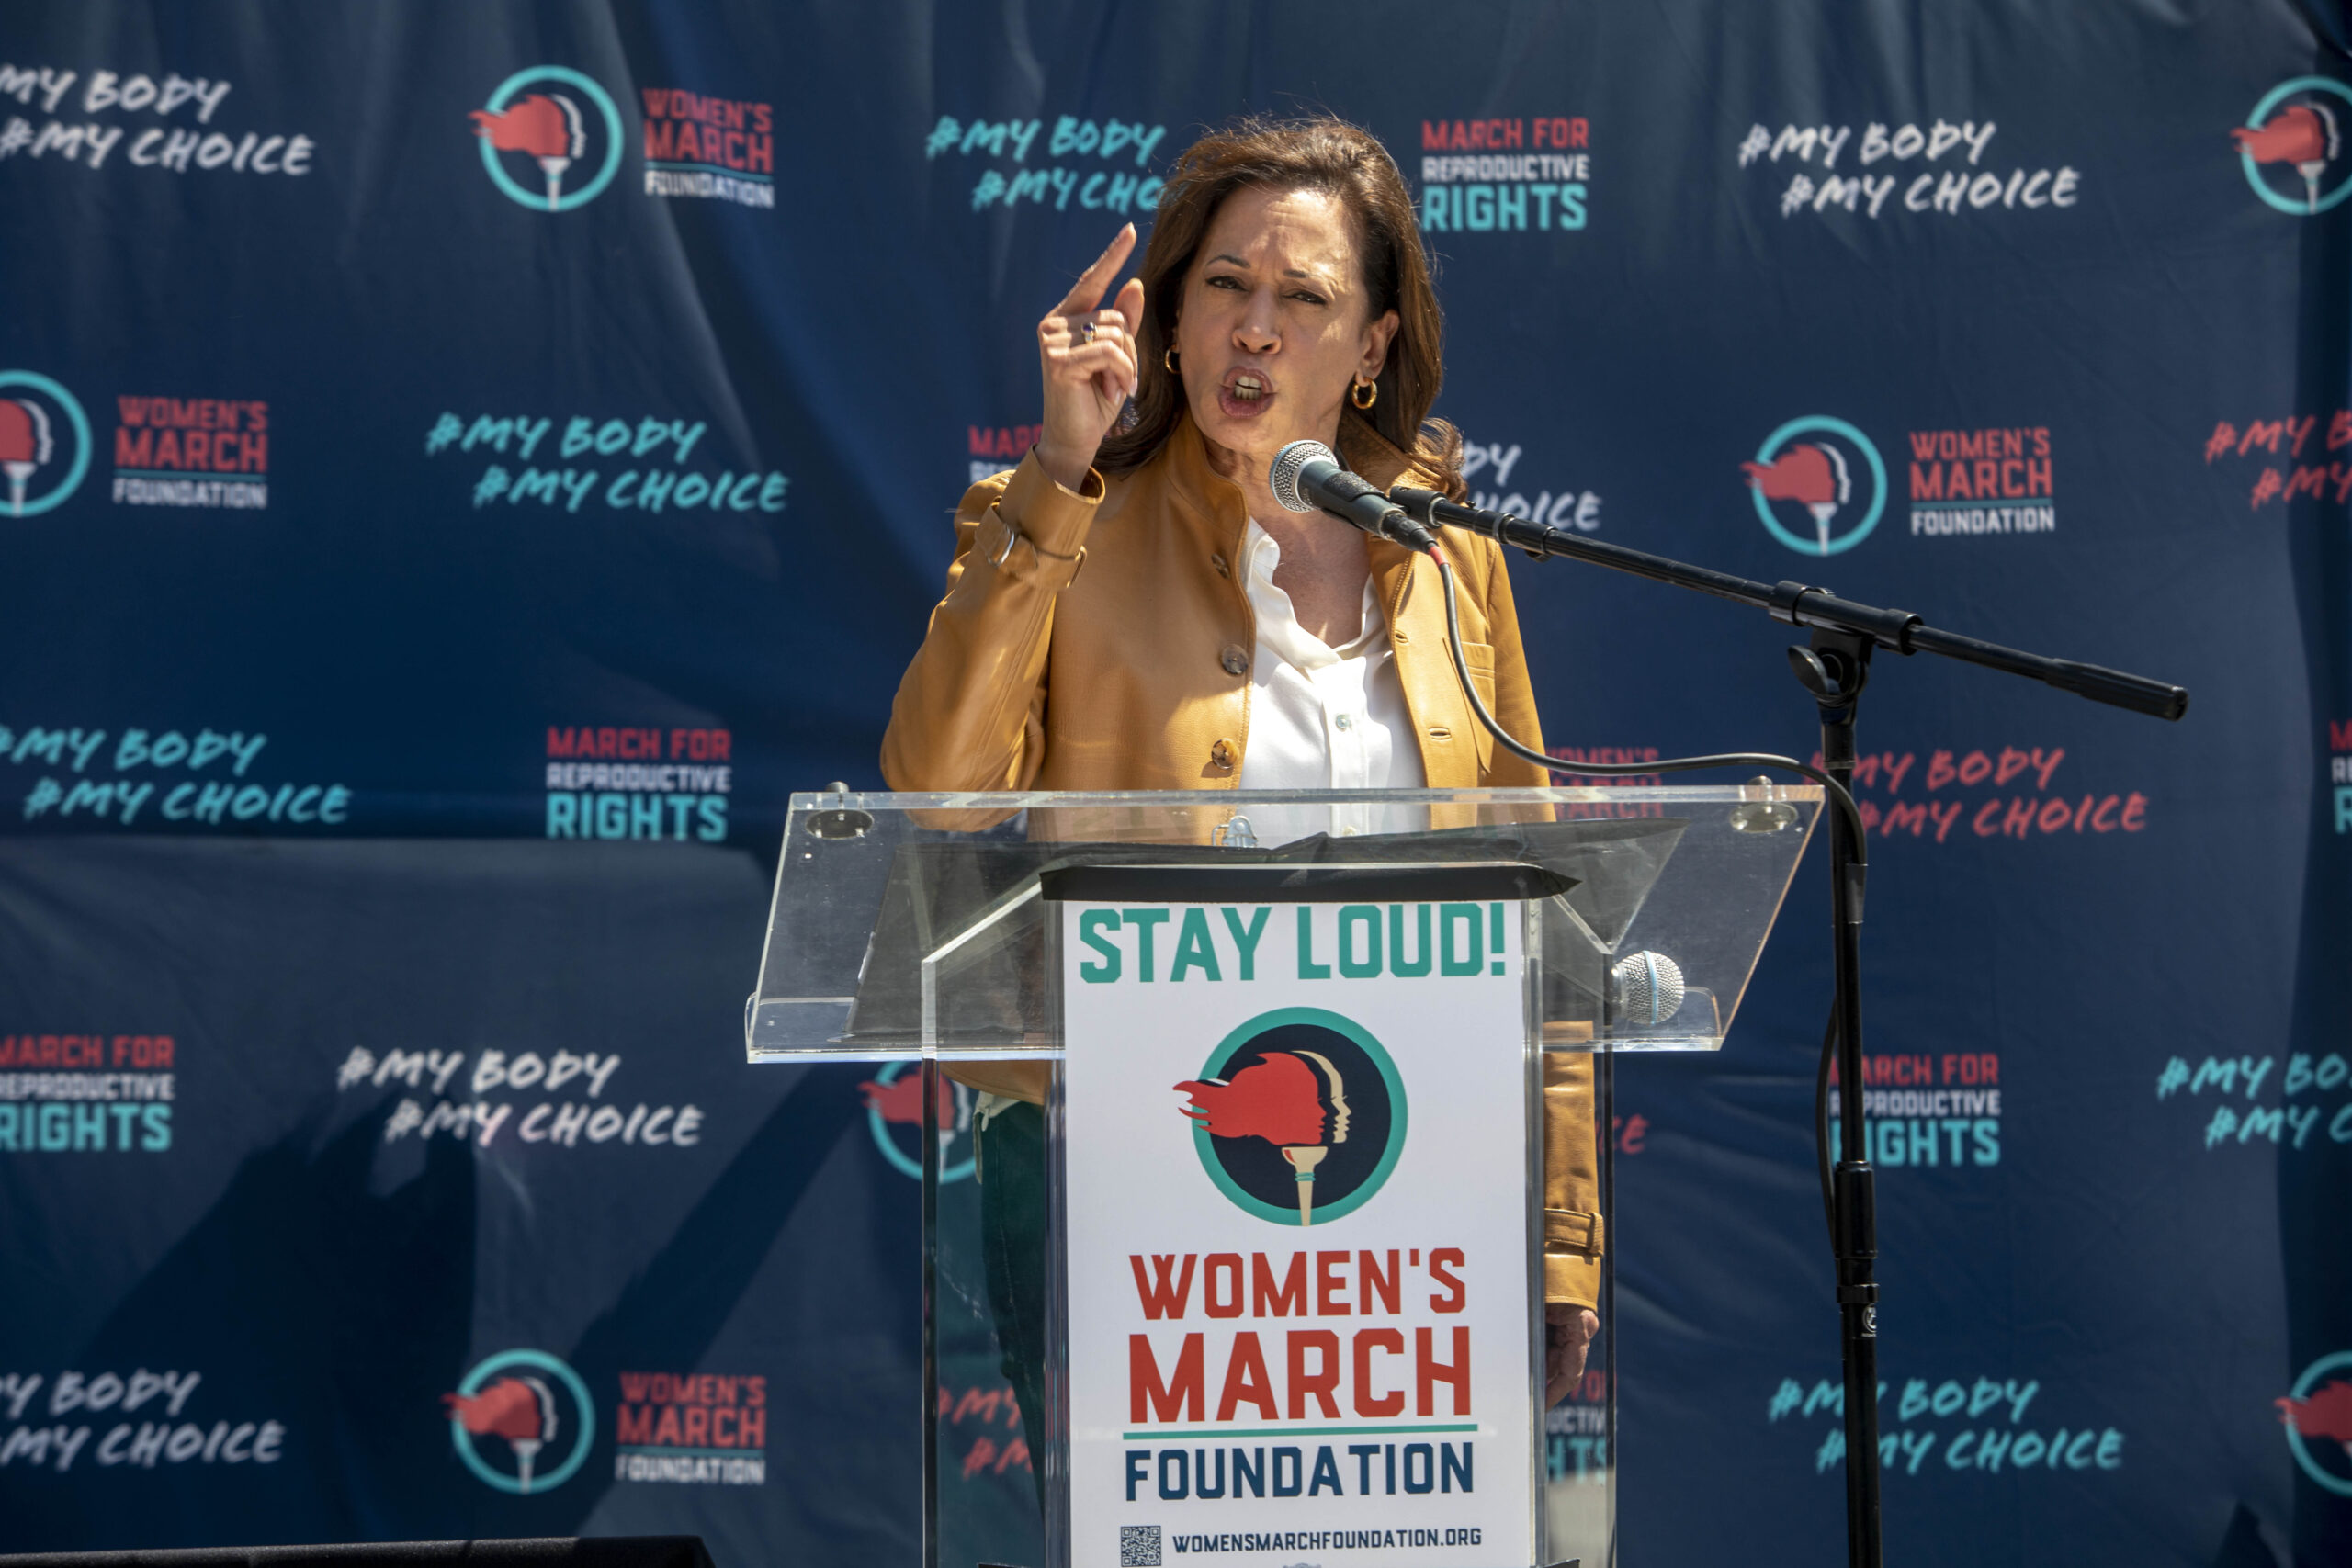 ‘Attacking America’: Kamala Harris Says Pro-Life Policies Target ‘Our Democracy’ At Abortion Rally